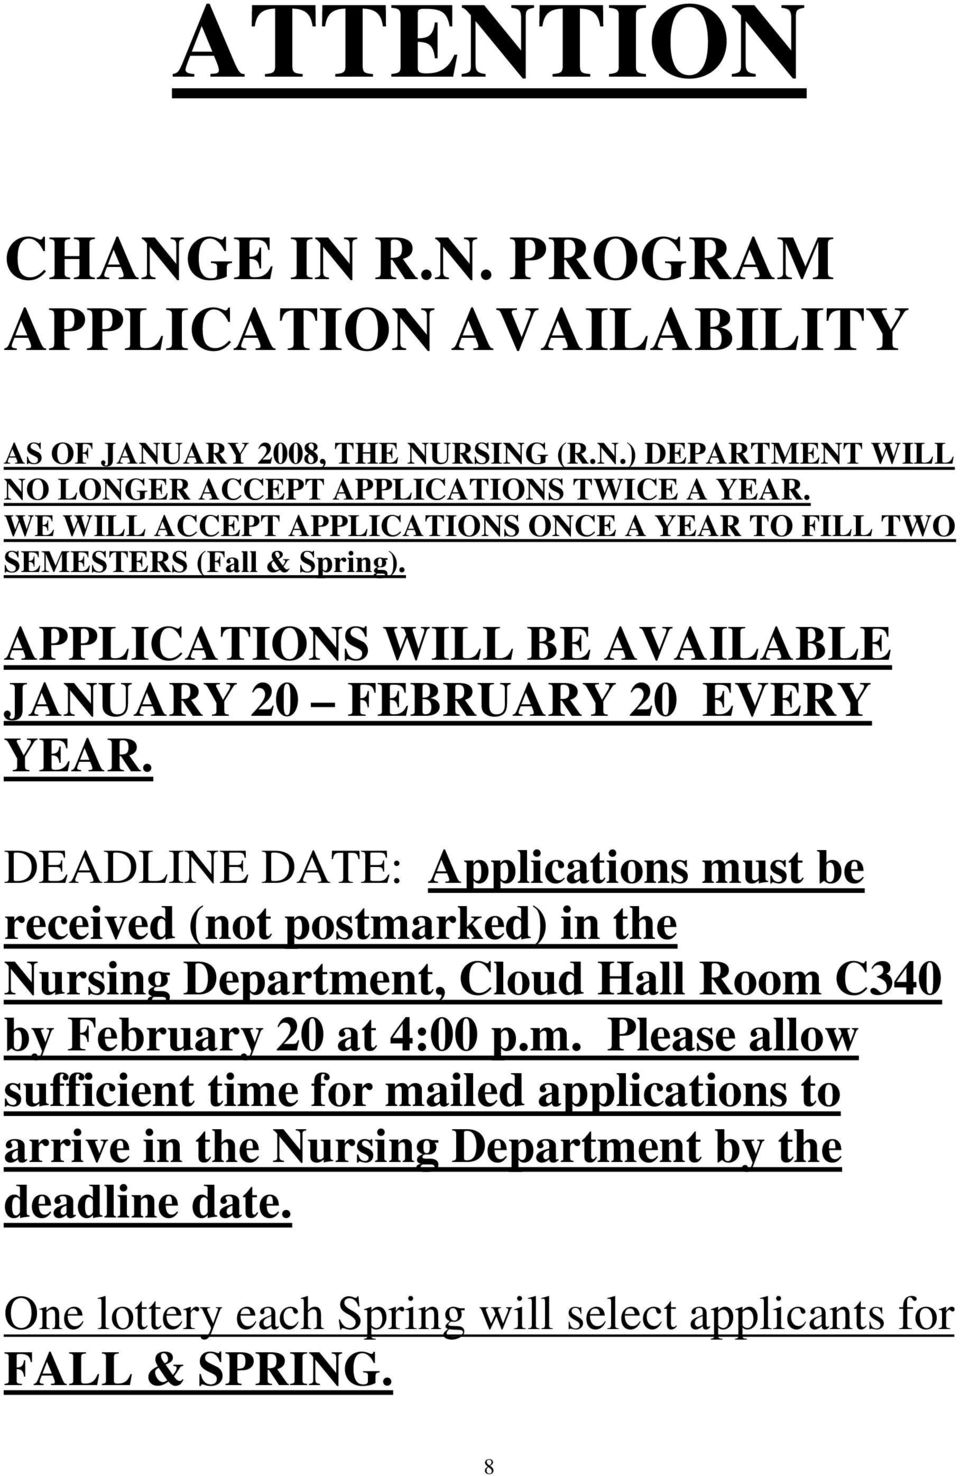 DEADLINE DATE: Applications must be received (not postmarked) in the Nursing Department, Cloud Hall Room C340 by February 20 at 4:00 p.m. Please allow sufficient time for mailed applications to arrive in the Nursing Department by the deadline date.